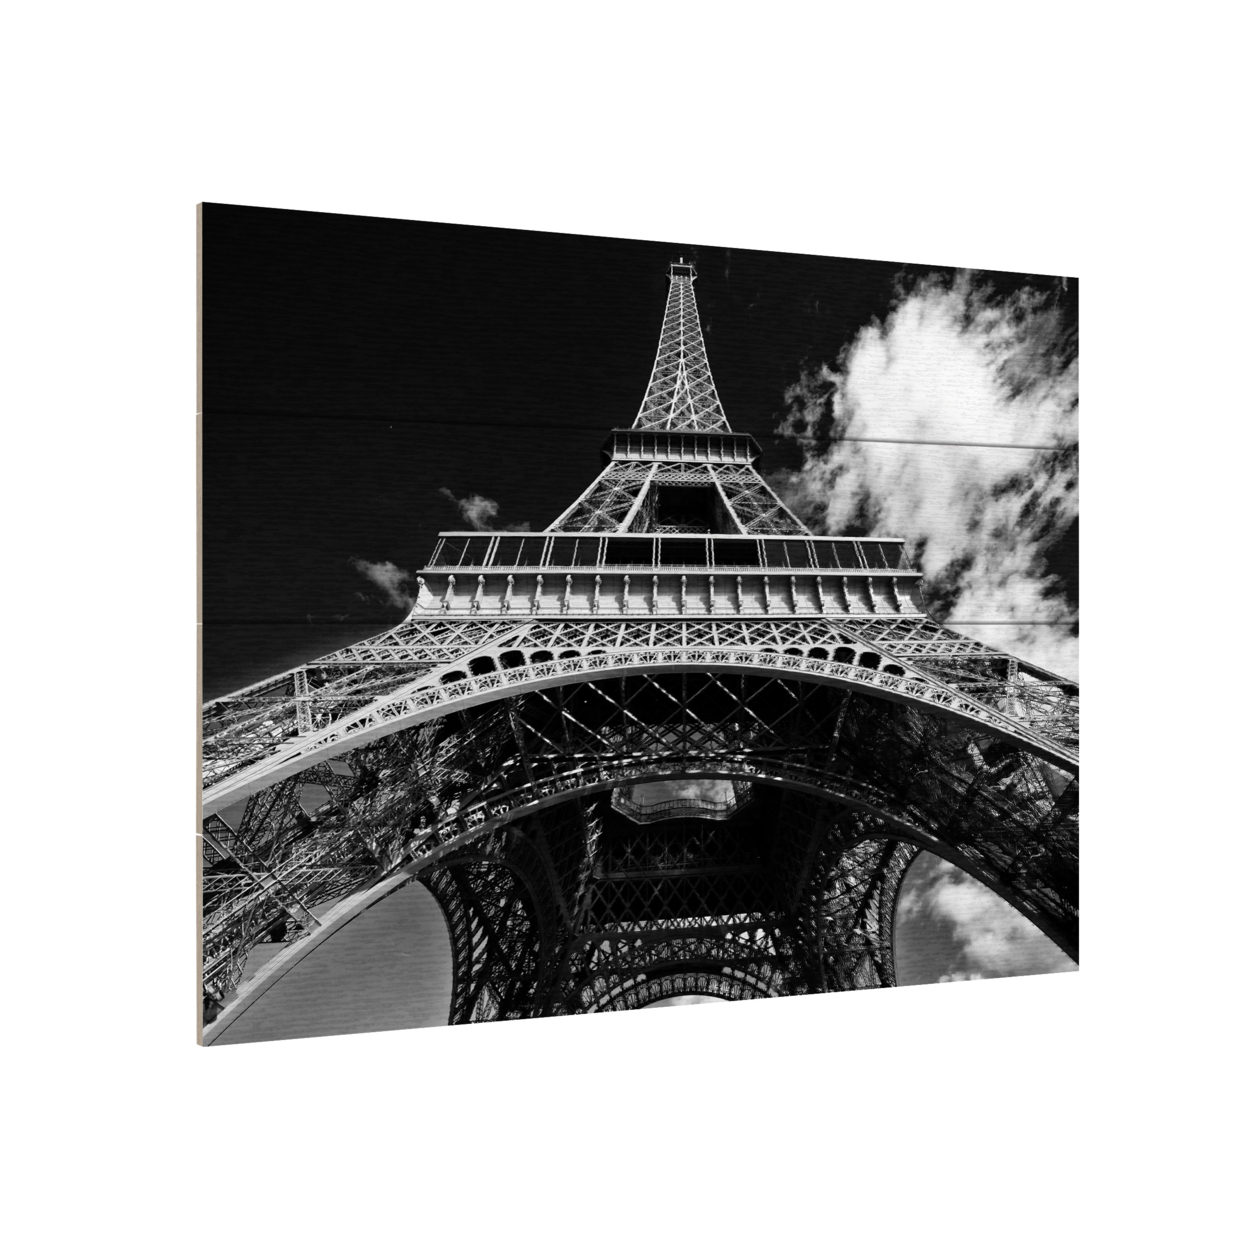 Wall Art 12 X 16 Inches Titled Paris Eiffel Tower 1 Ready To Hang Printed On Wooden Planks